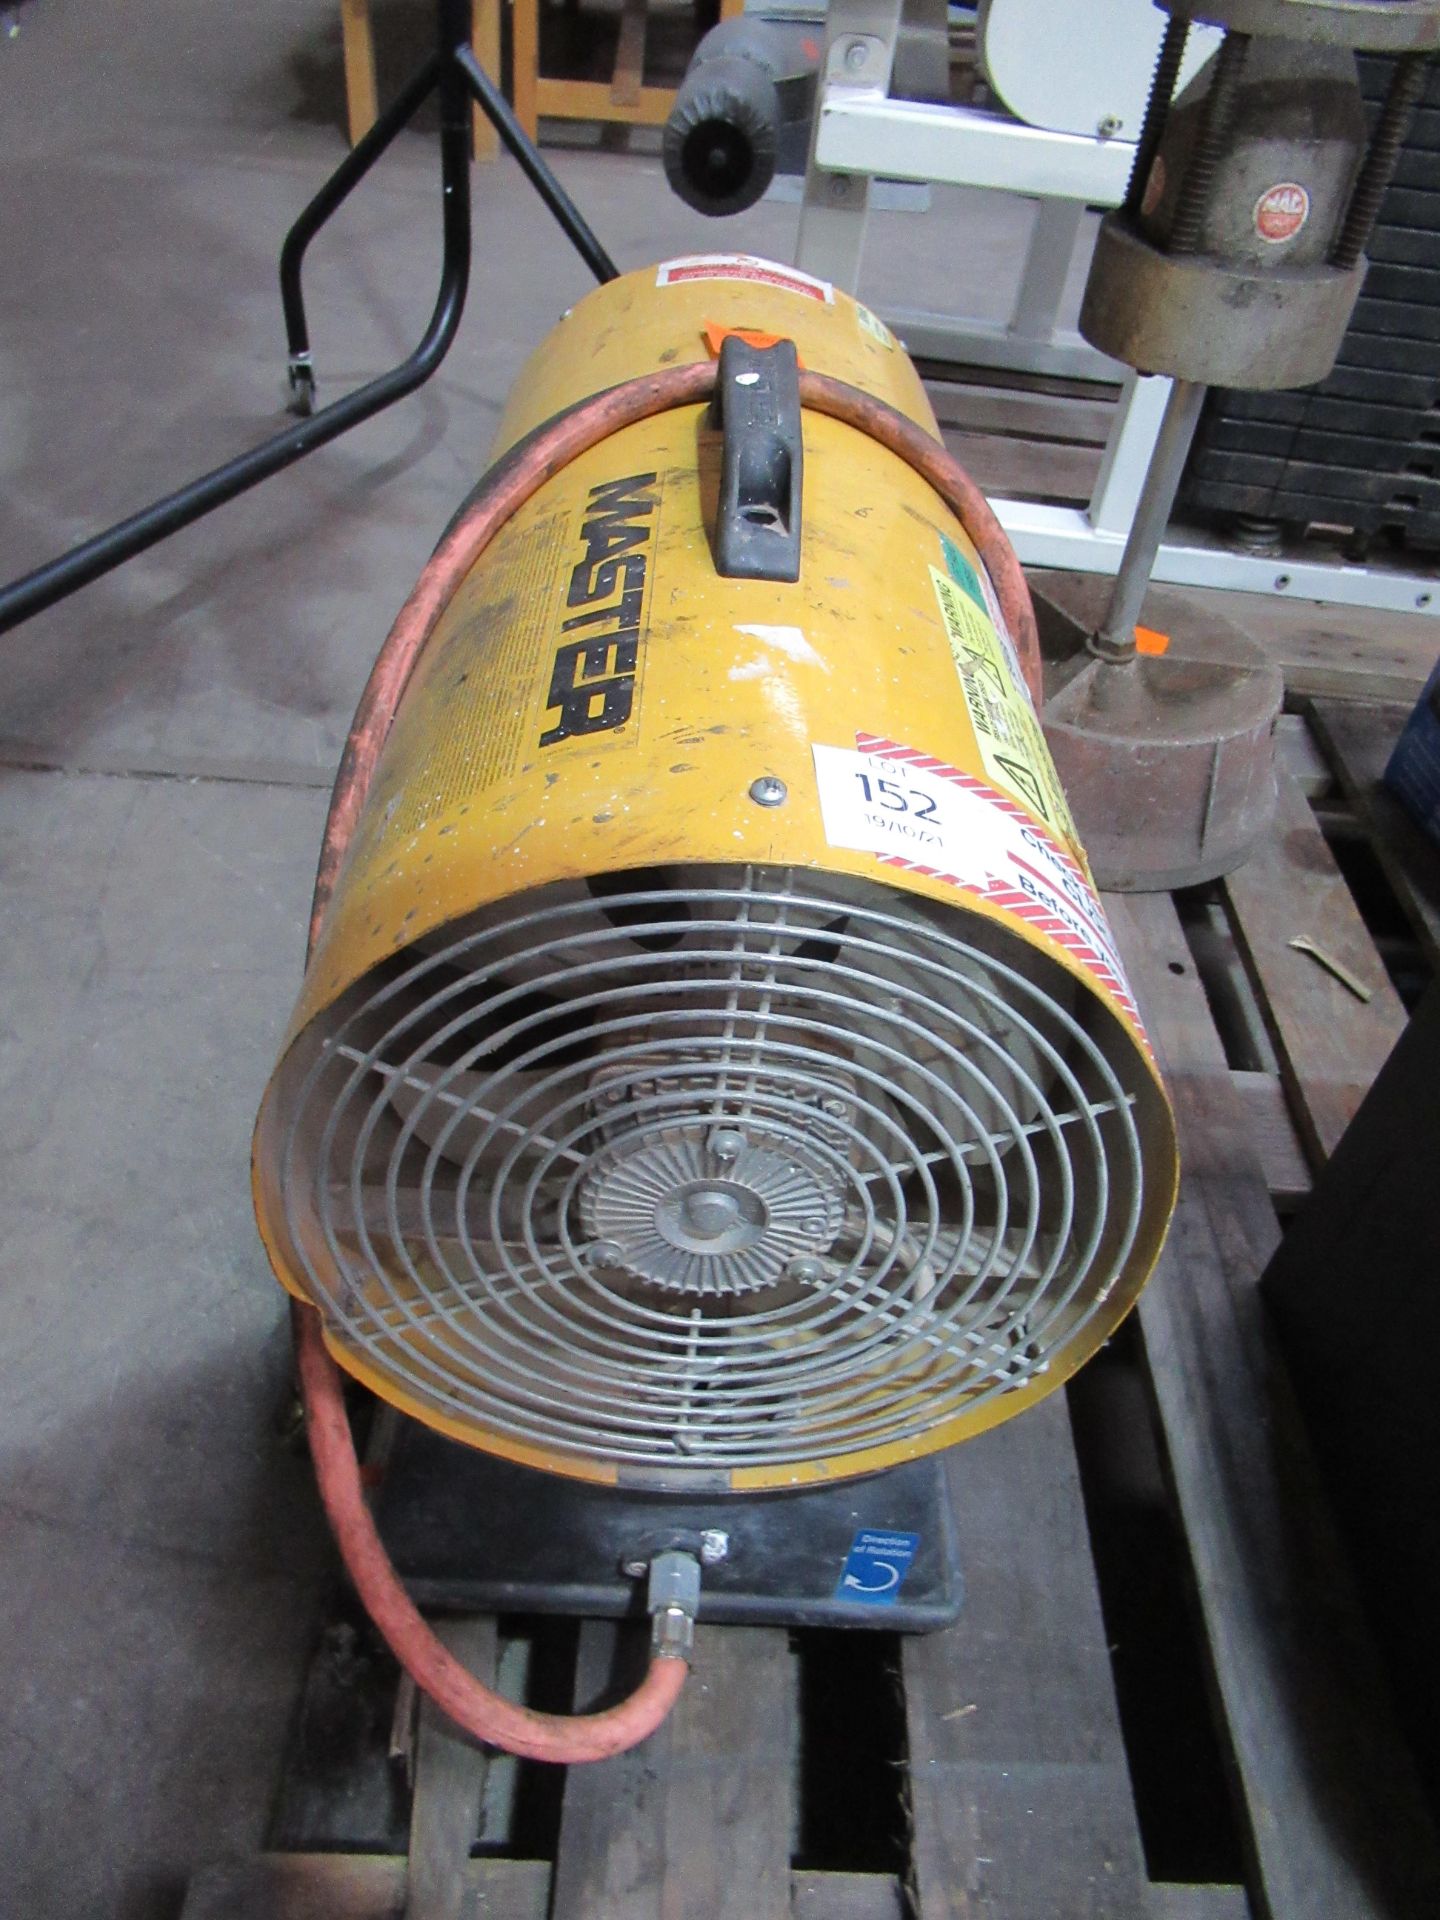 110v space heater and a MAC tyre balancer